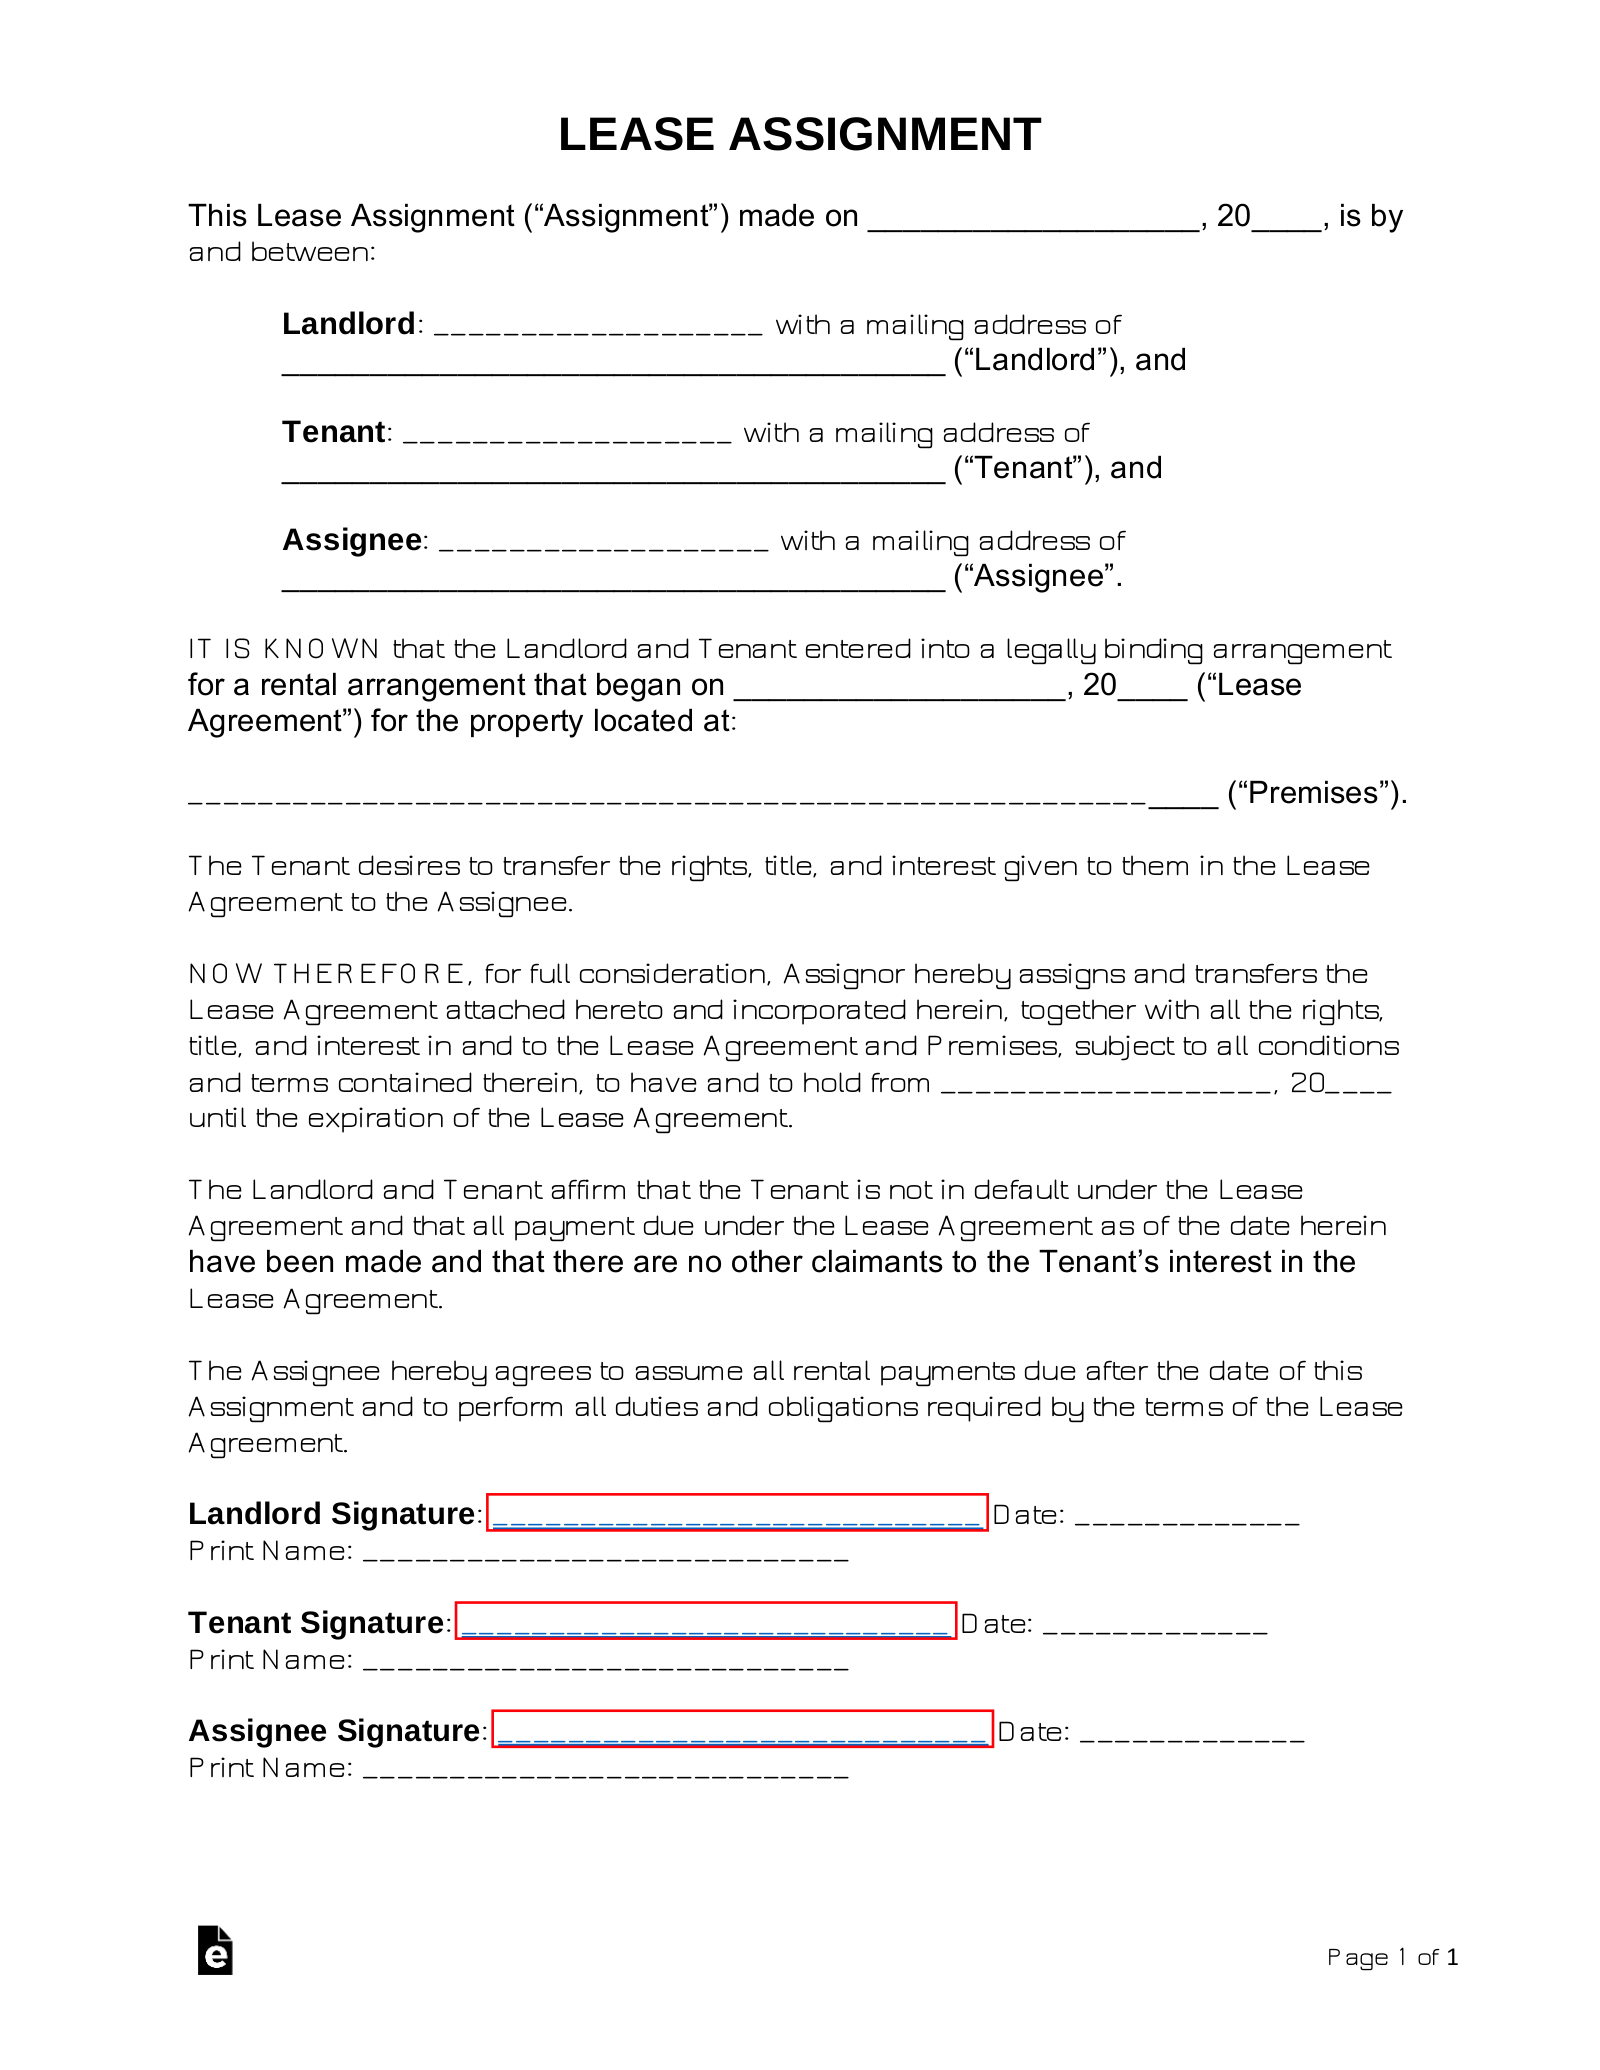 contract assignment property